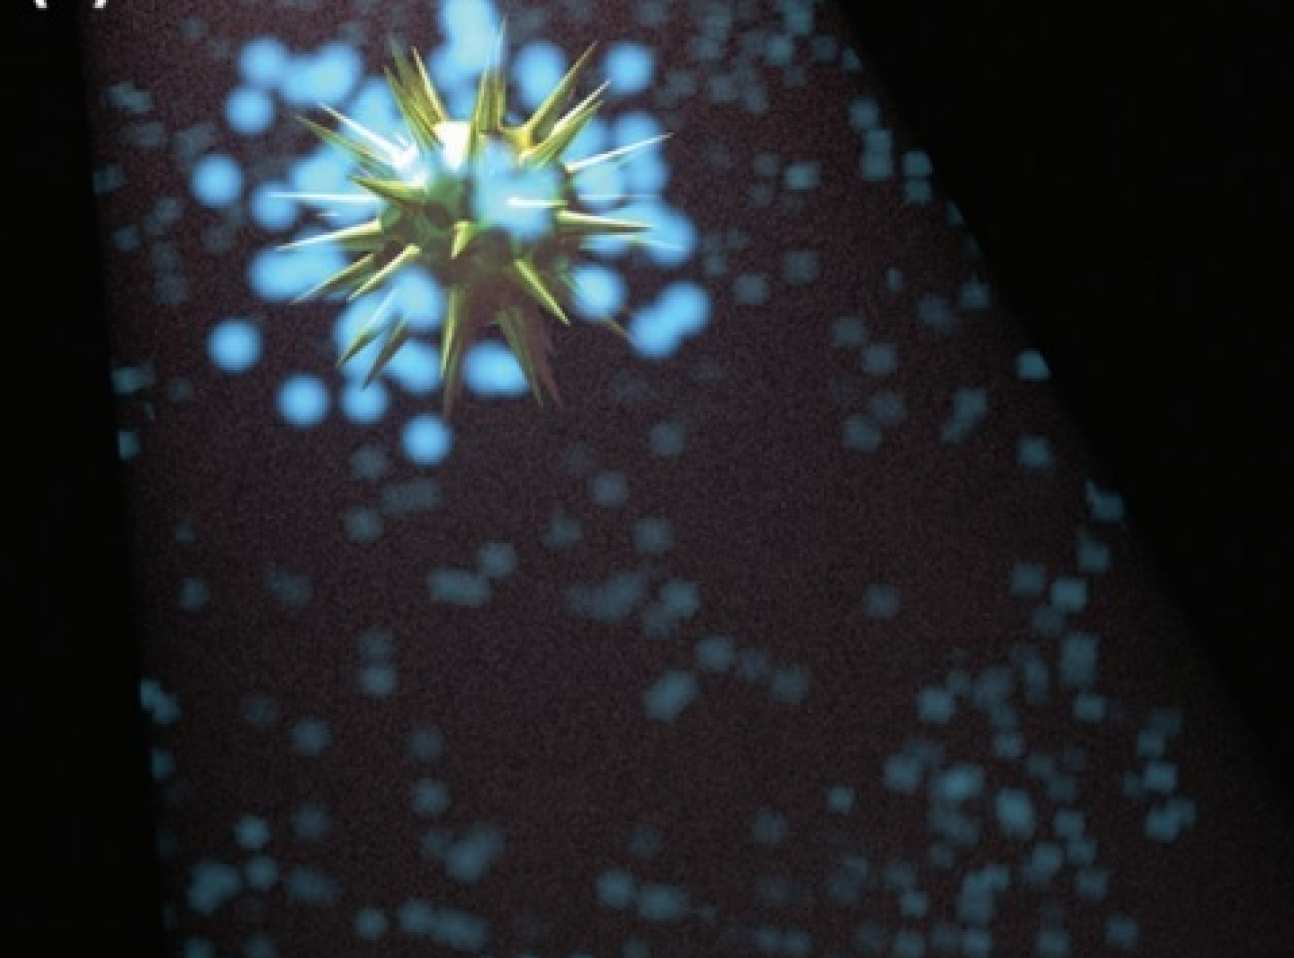 Illustration of the nanoparticles highlighting a tumour